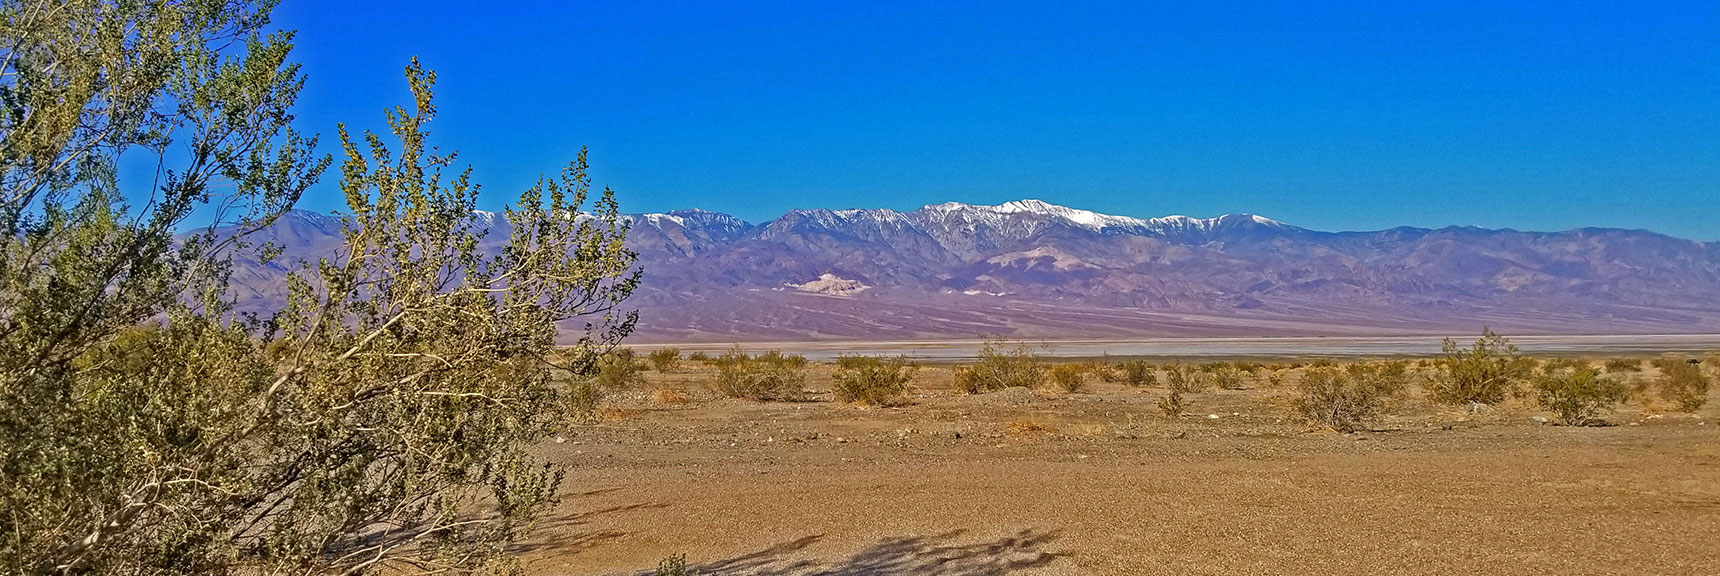 Panamint Range with Telescope Peak from Trailhead Parking Area | Sidewinder Canyon | Death Valley National Park, California